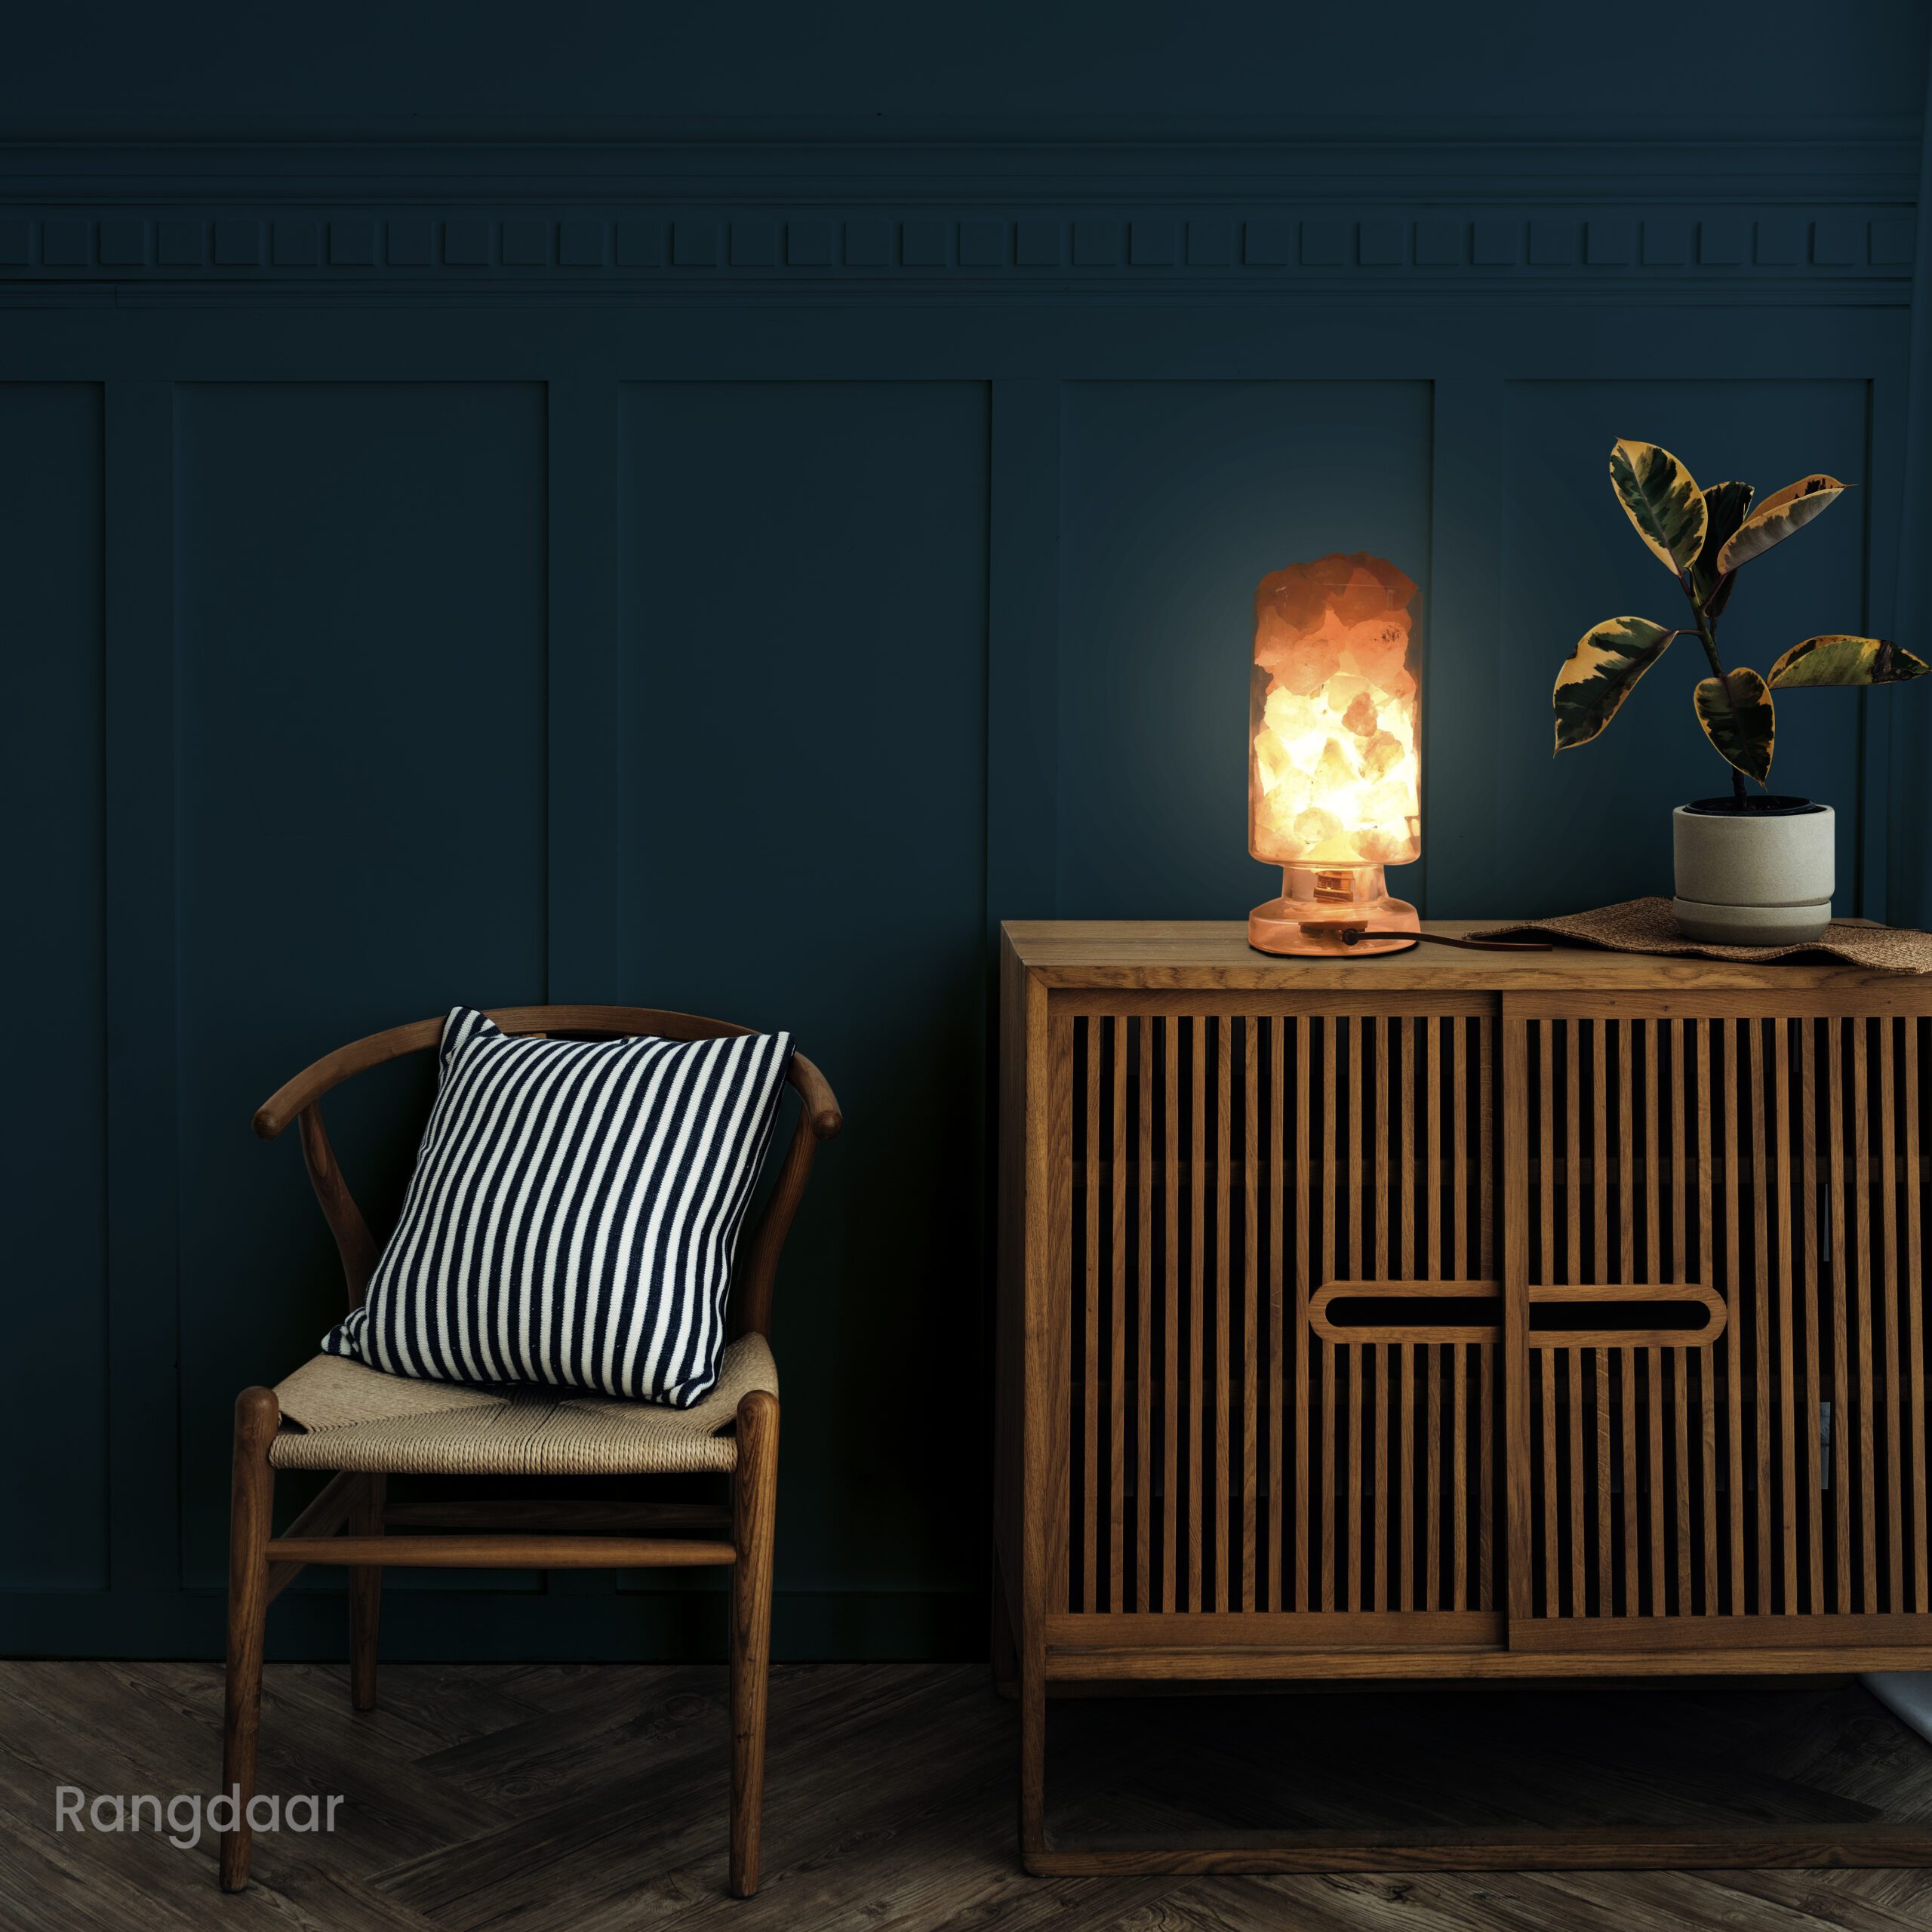 Scandinavian vintage wood cabinet with chair by a dark blue wall